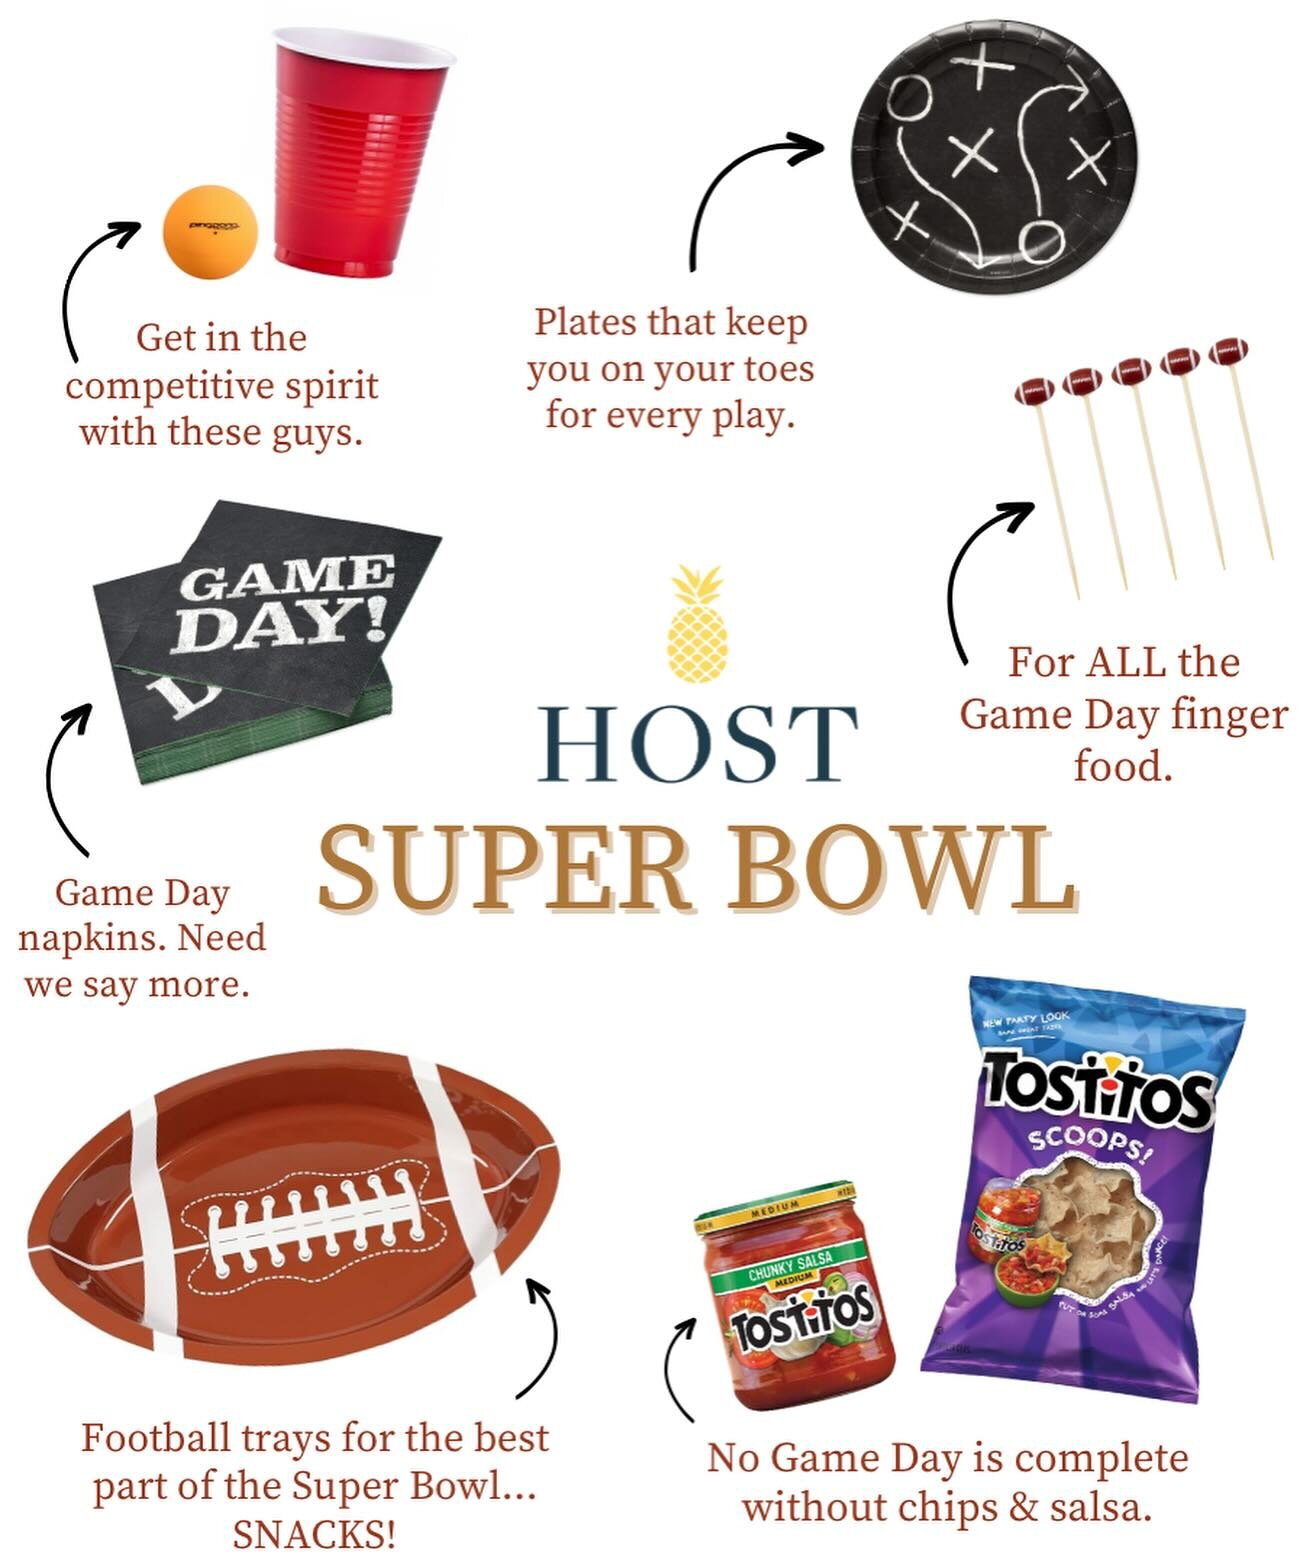 It&rsquo;s a big weekend for football 🏈 While you sweat the score, let us sweat the small stuff and get you ready the BIG game!

Introducing HOST Super Bowl. From football toothpicks for your favorite finger foods and plates for every play - we&rsqu